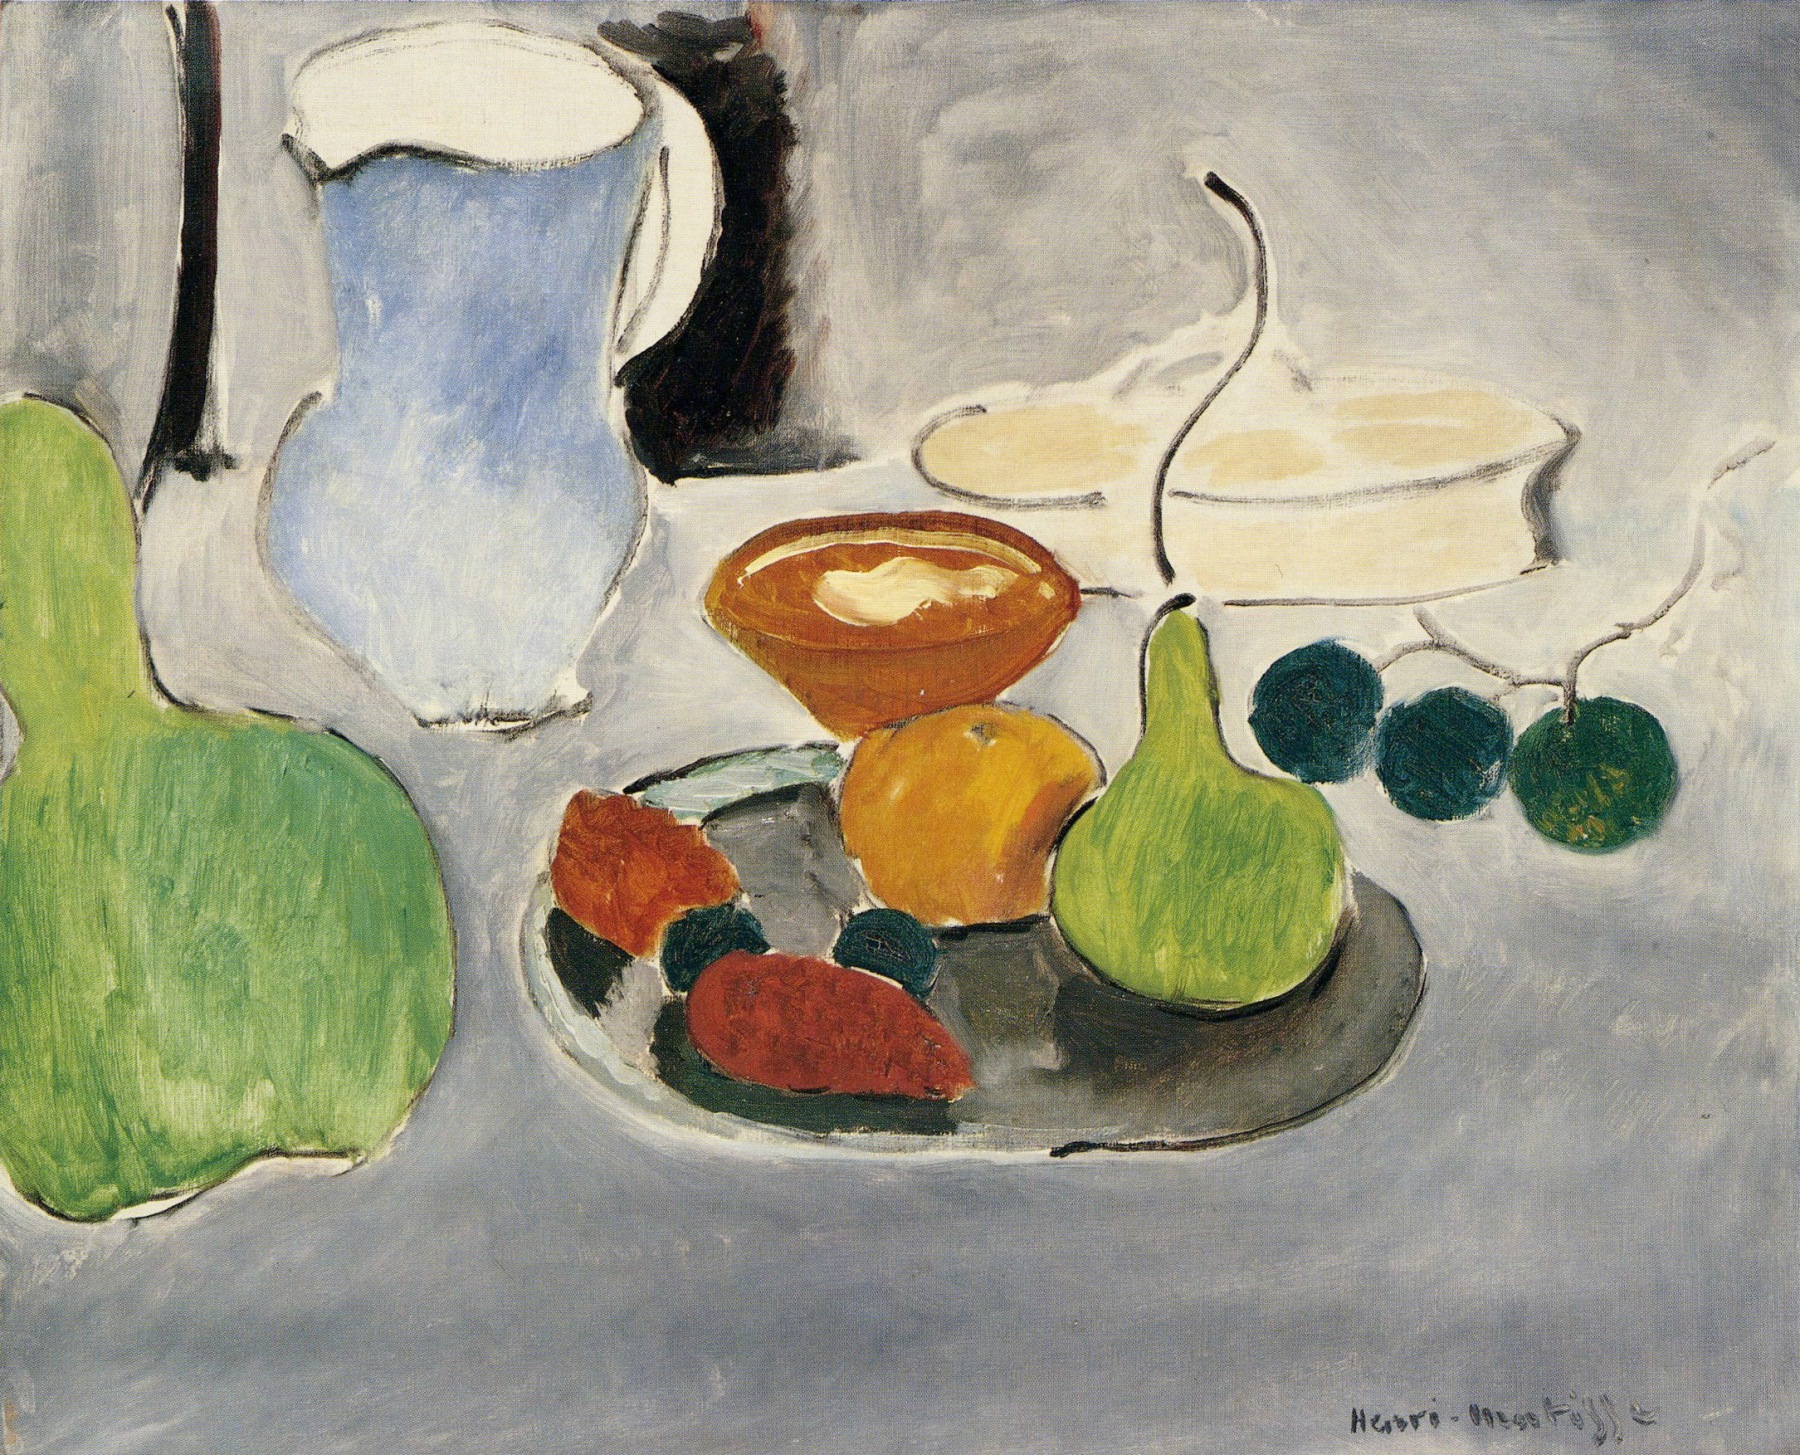 Henri Matisse, Still Life with Gourds and Blue Pitcher, 1916